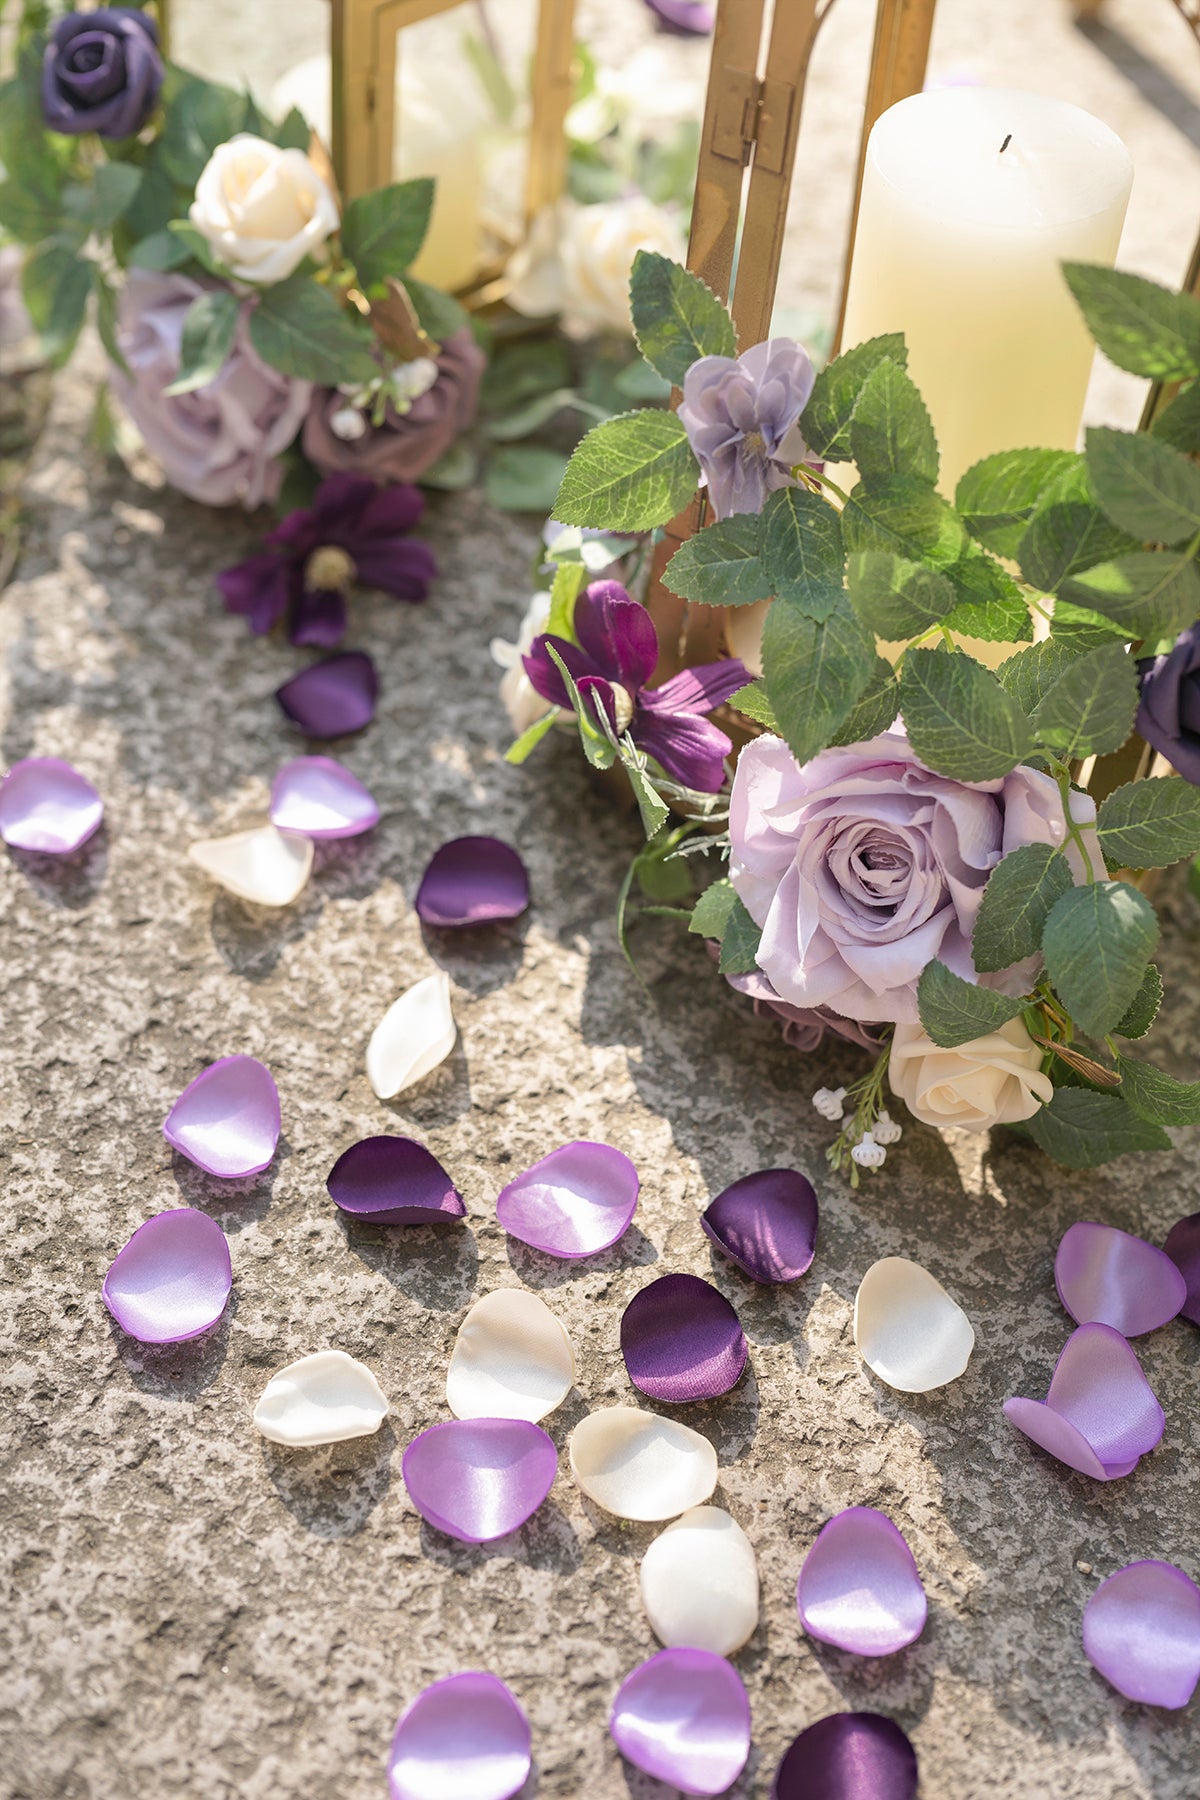 Additional Flower Decorations in Lilac & Gold